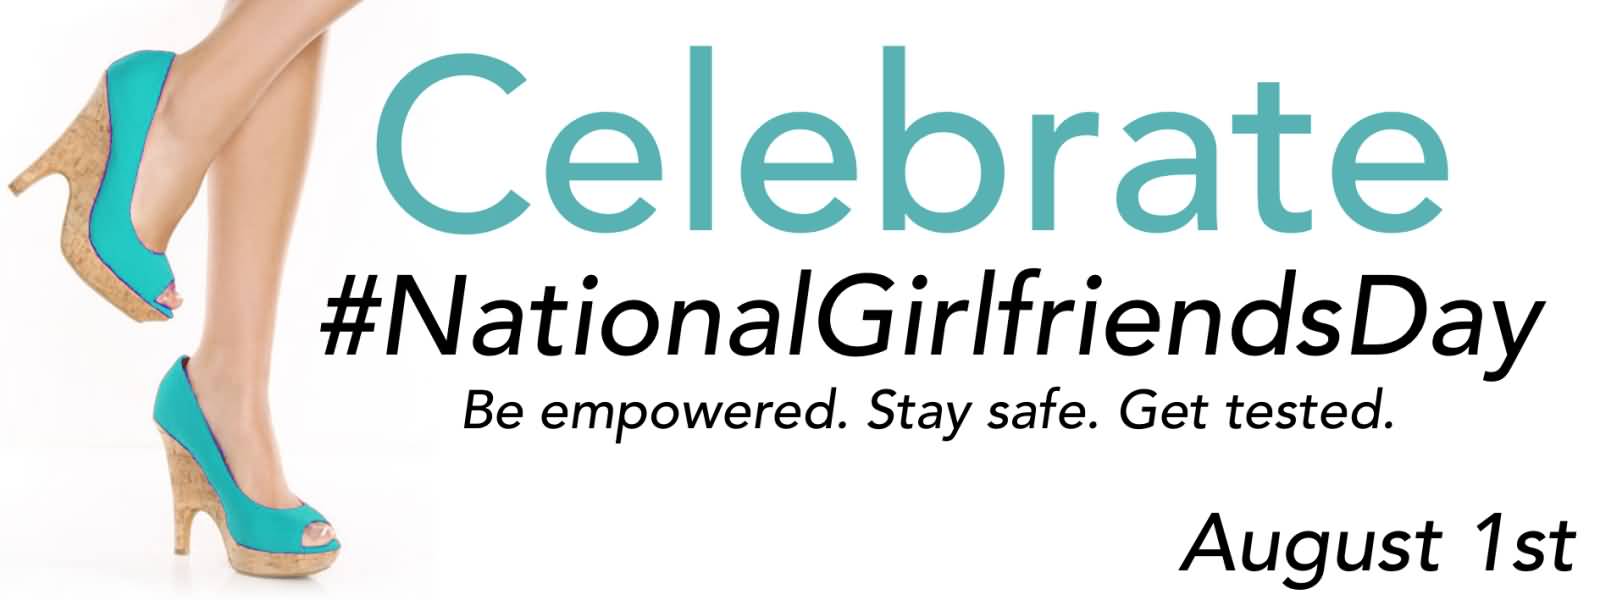 Celebrate National Girlfriends Day be empowered. stay safe get tested